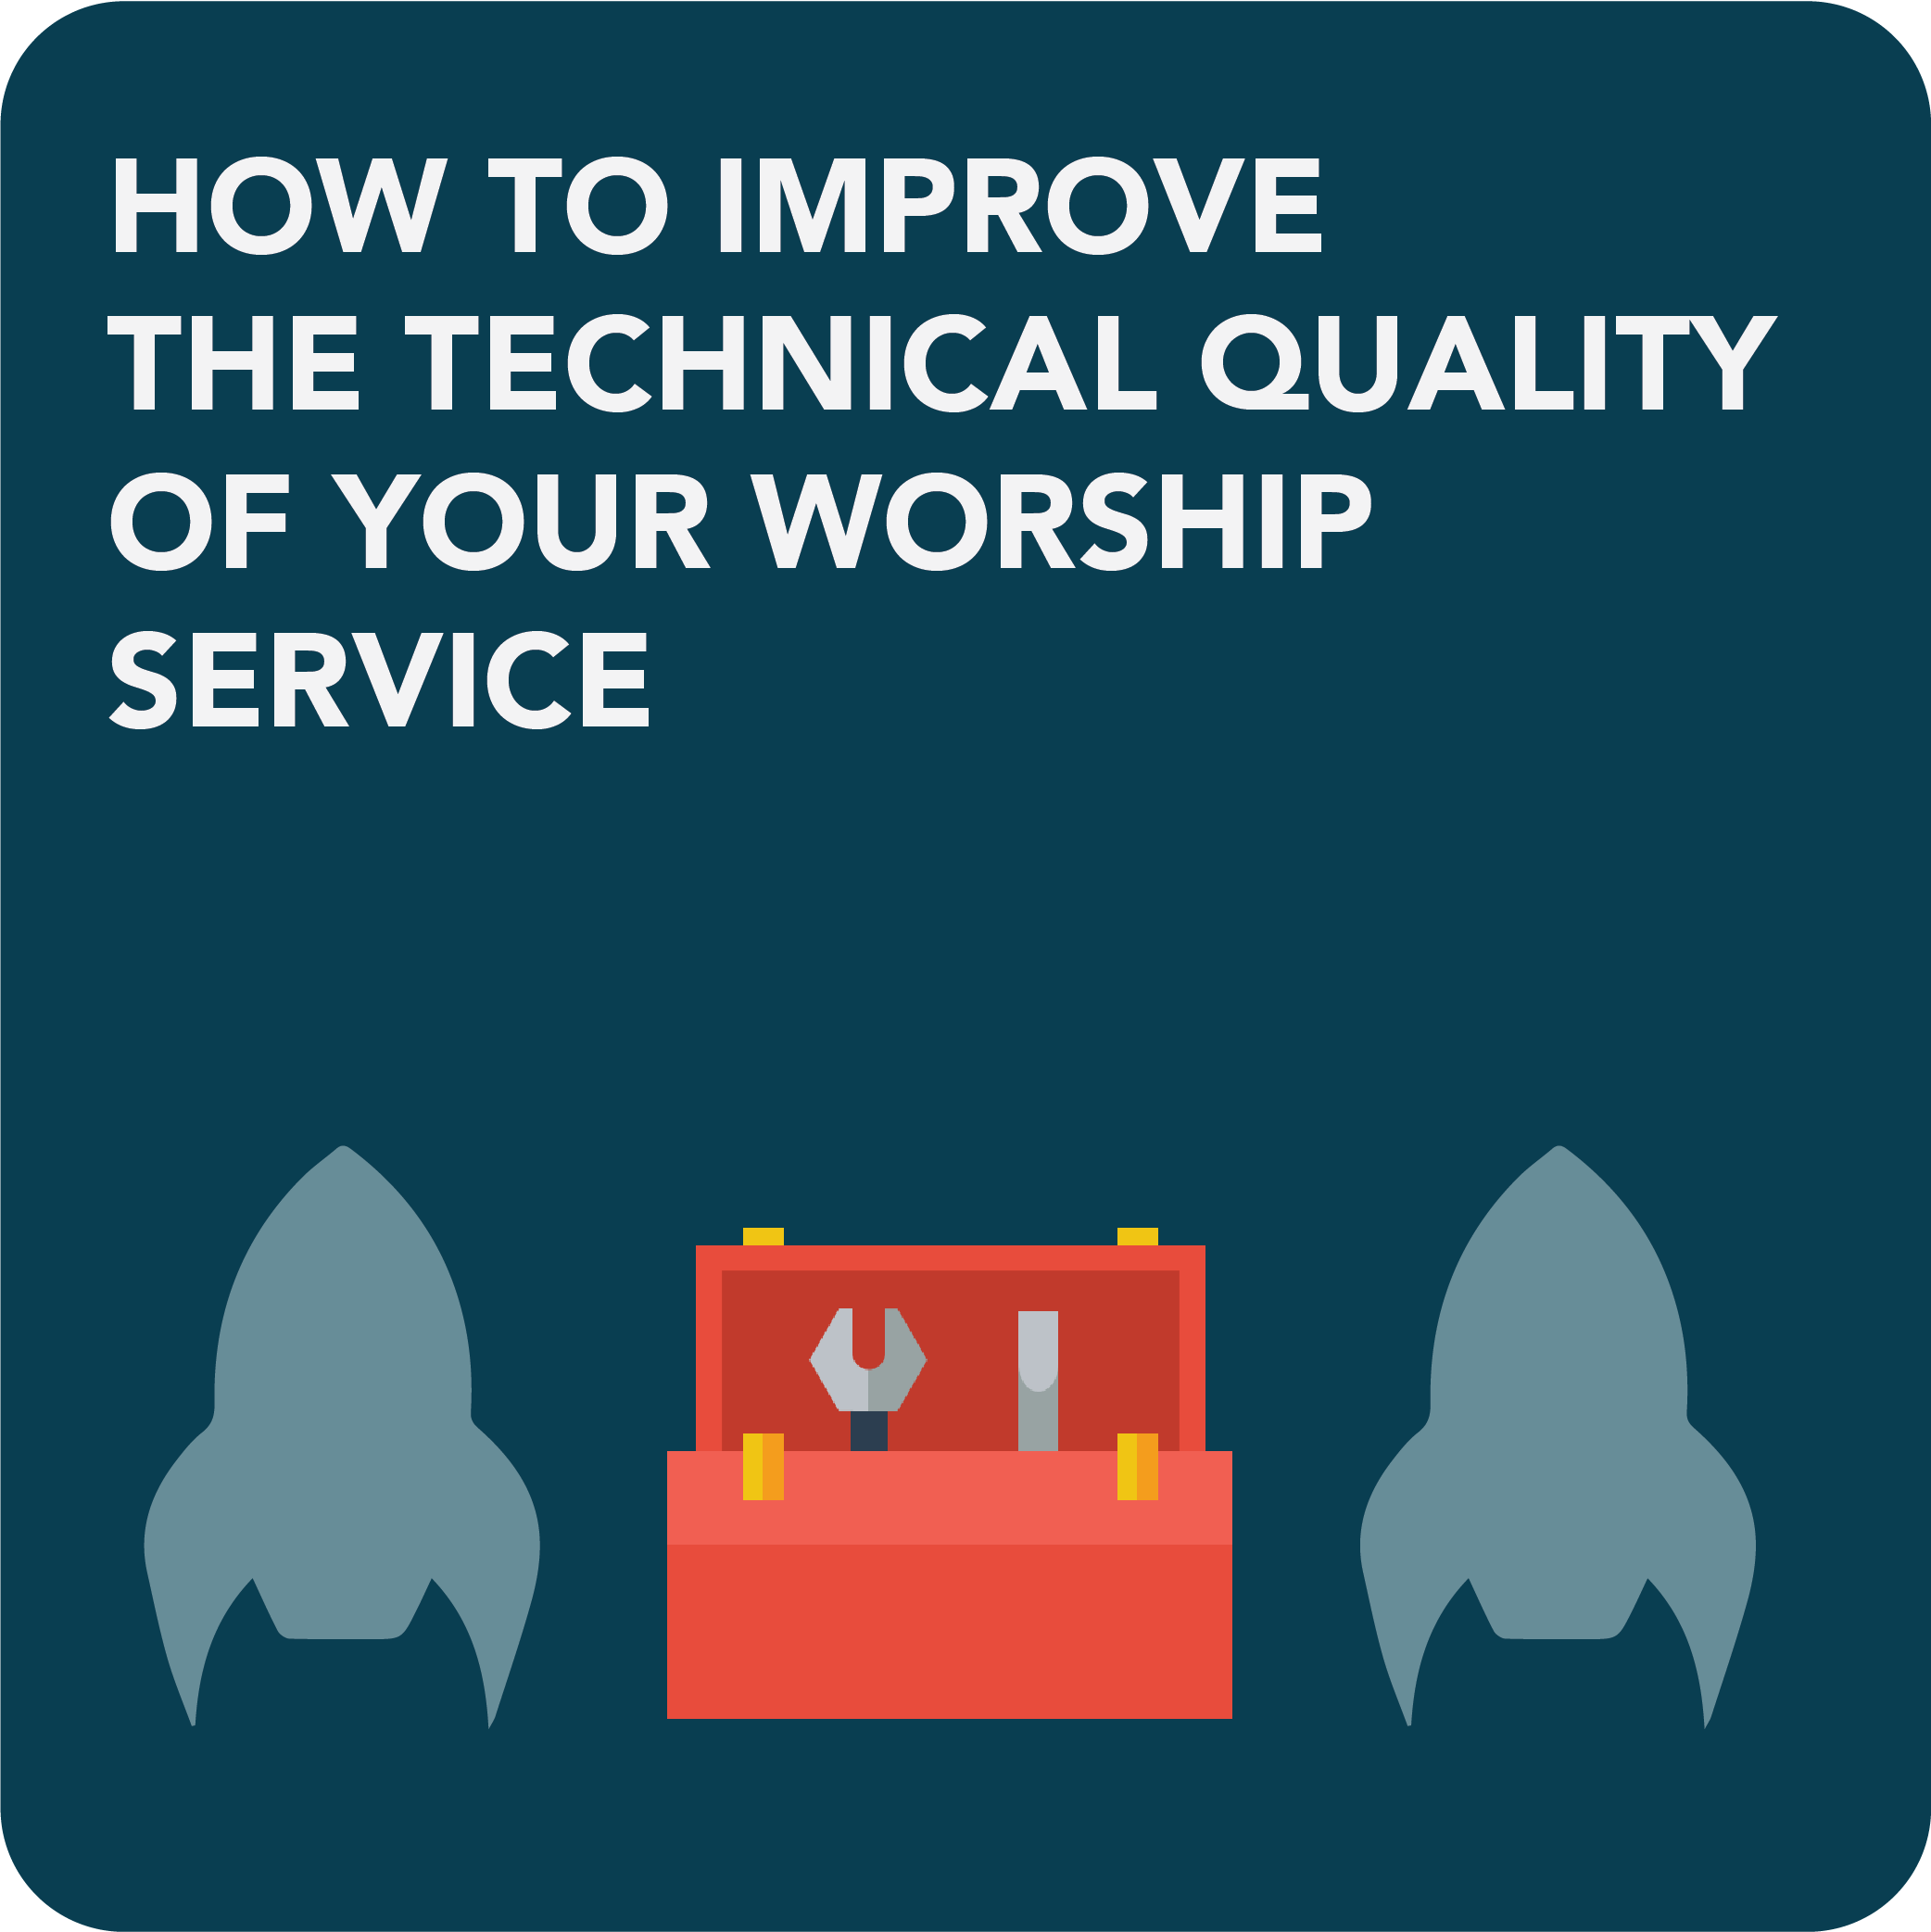 https://kb951.infusionsoft.com/app/orderForms/How-To-Improve-The-Technical-Quality-Of-Your-Worship-Service